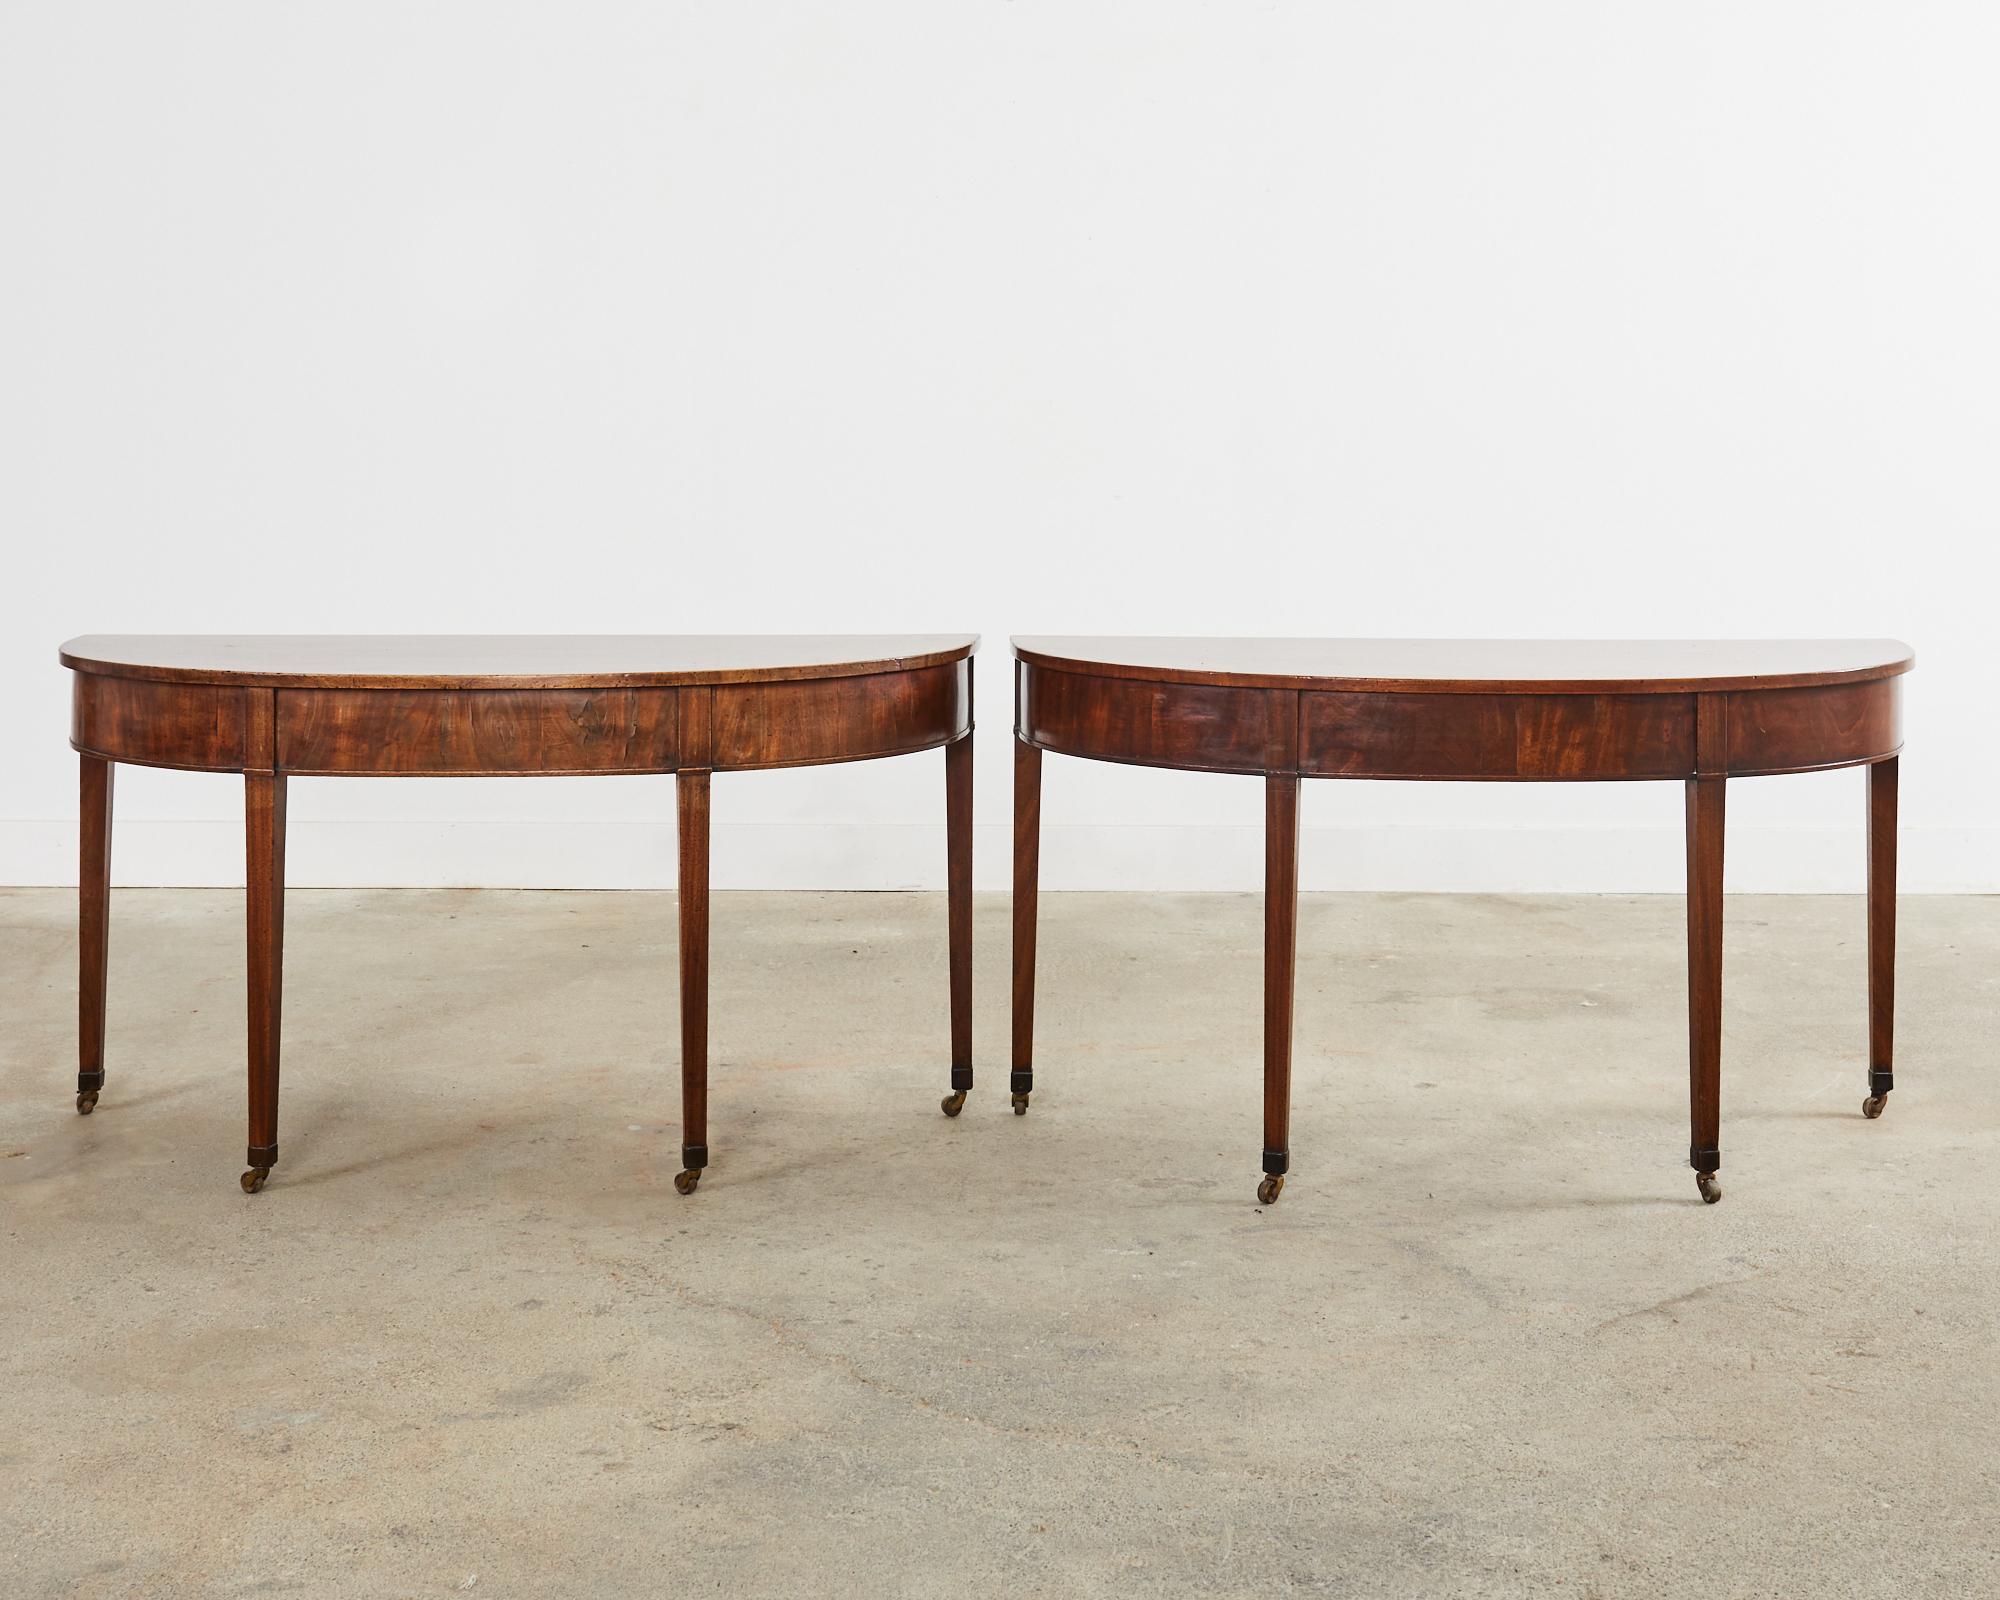 English 19th Century Pair of George III Mahogany Demilune Console Tables